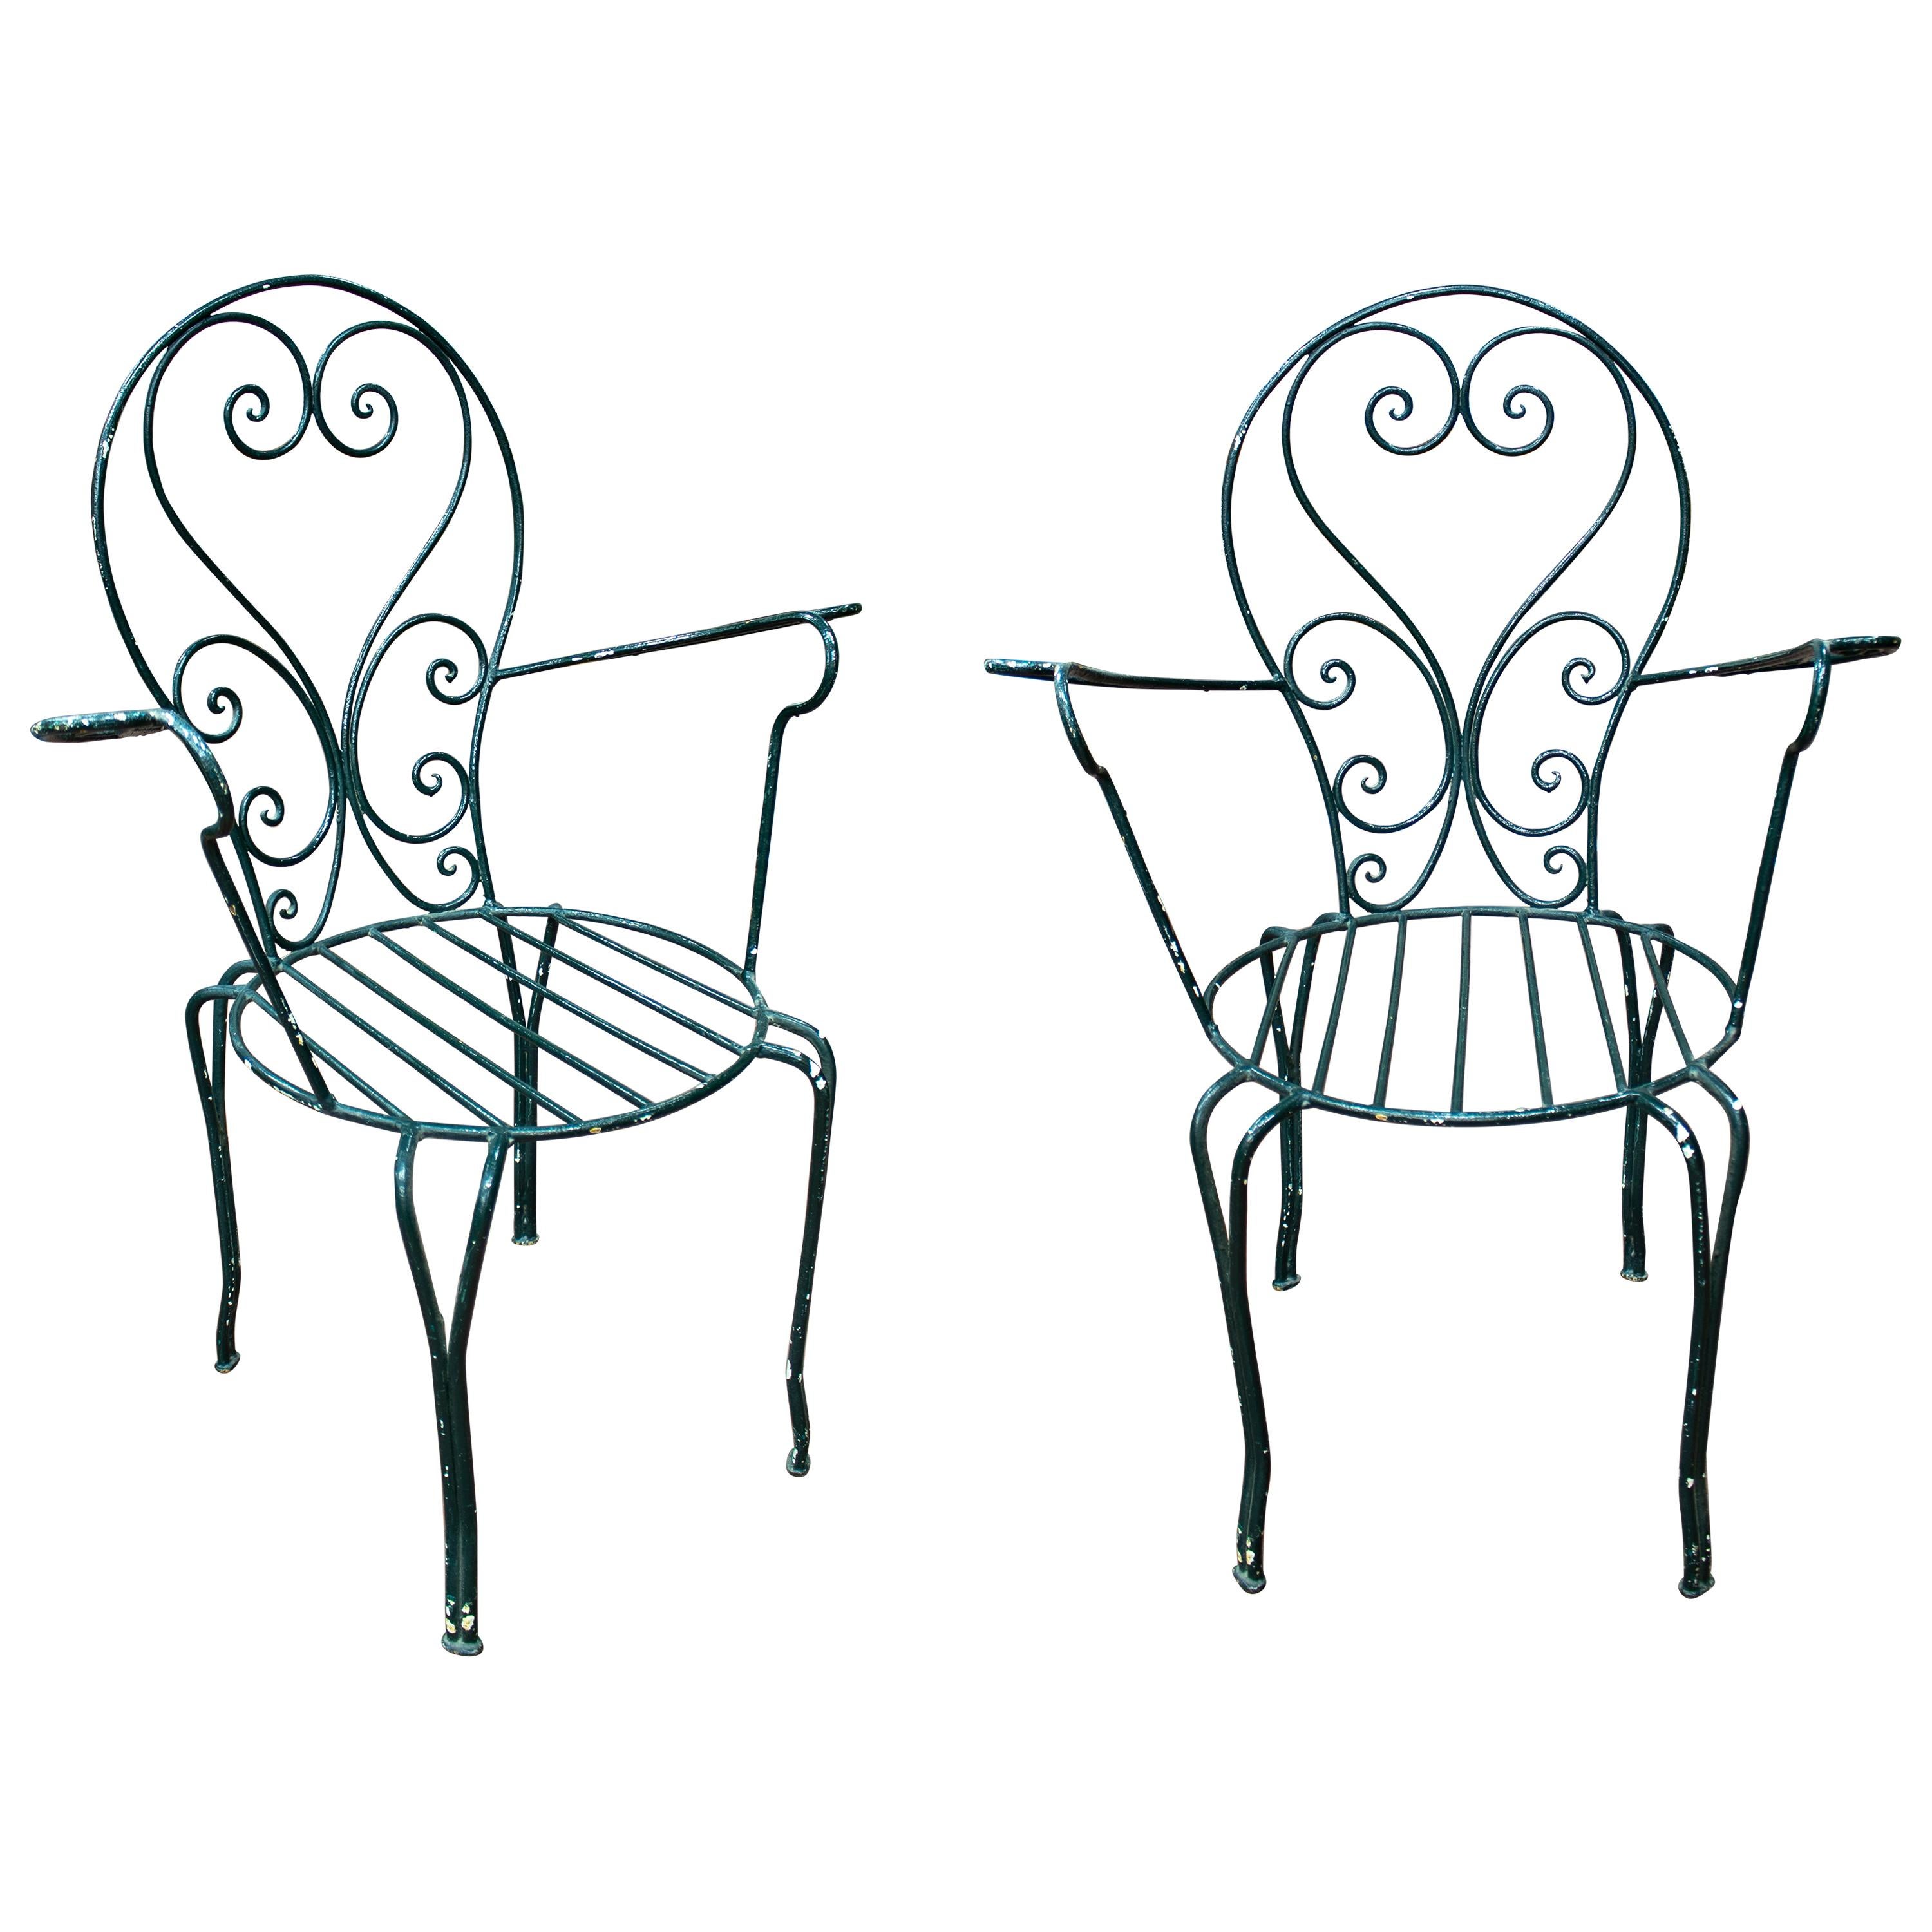 1970s Pair of Spanish Iron Garden Armchairs For Sale